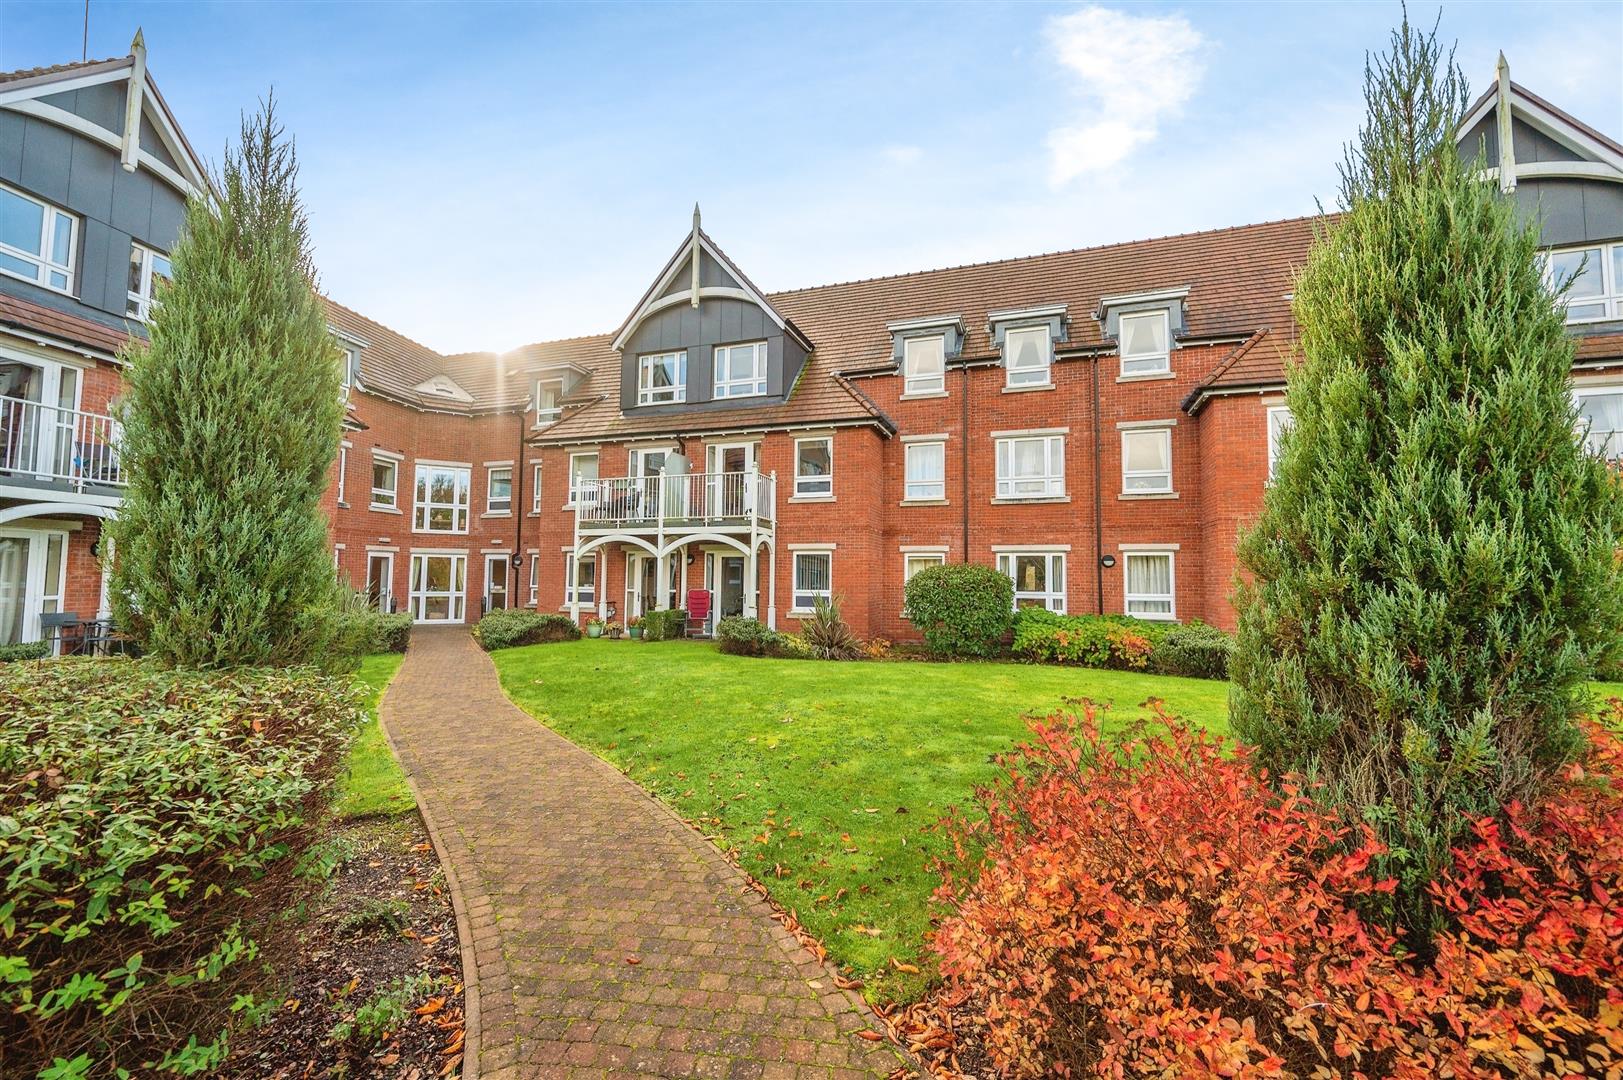 Horton Mill Court, Hanbury Road, Droitwich. Worcestertshire. WR9 8GD